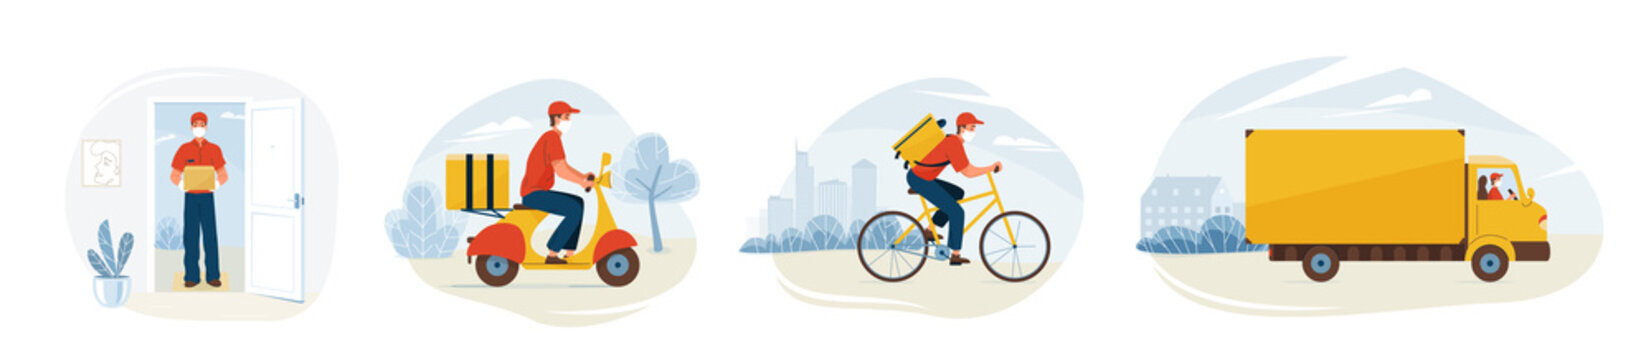 Delivery service vector illustration. Fast safe deliver by courier man to home. Bicycle, motorcycle and truck ride on the road with landscape. Worker wearing in mask gloves to prevent corona pandemic